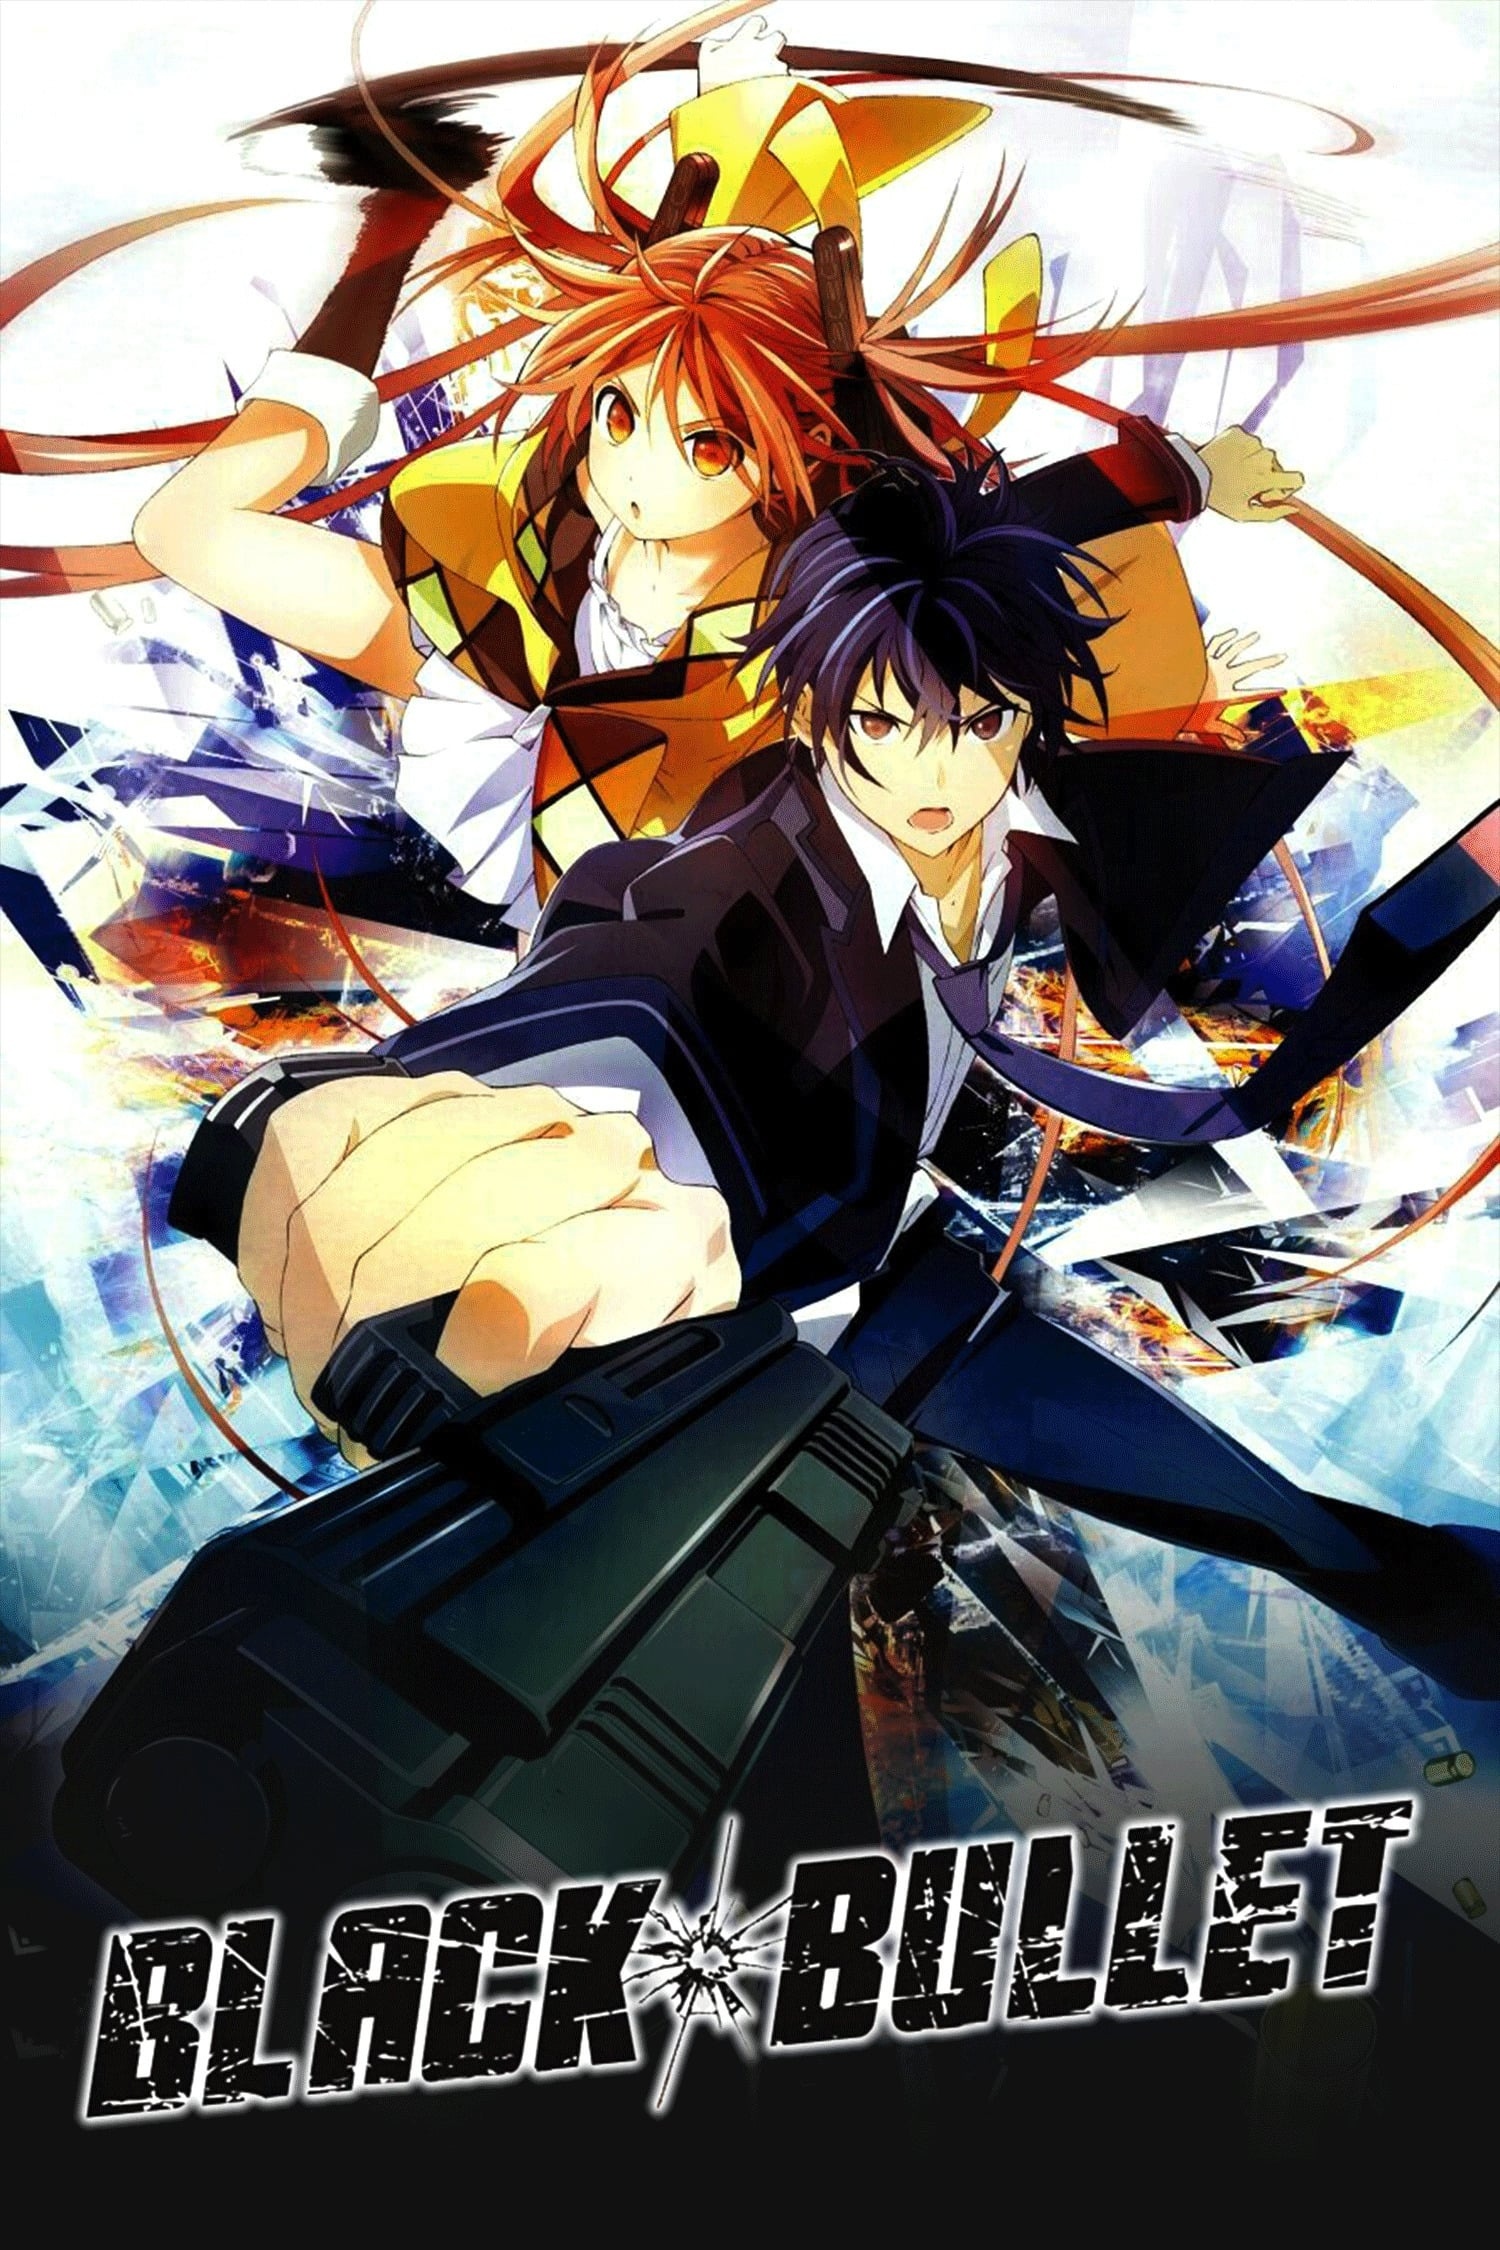 Black Bullet (Anime): TV Series 2014, Two Civil Security workers, Mission to protect the Tokyo Area from destruction. 1500x2250 HD Wallpaper.